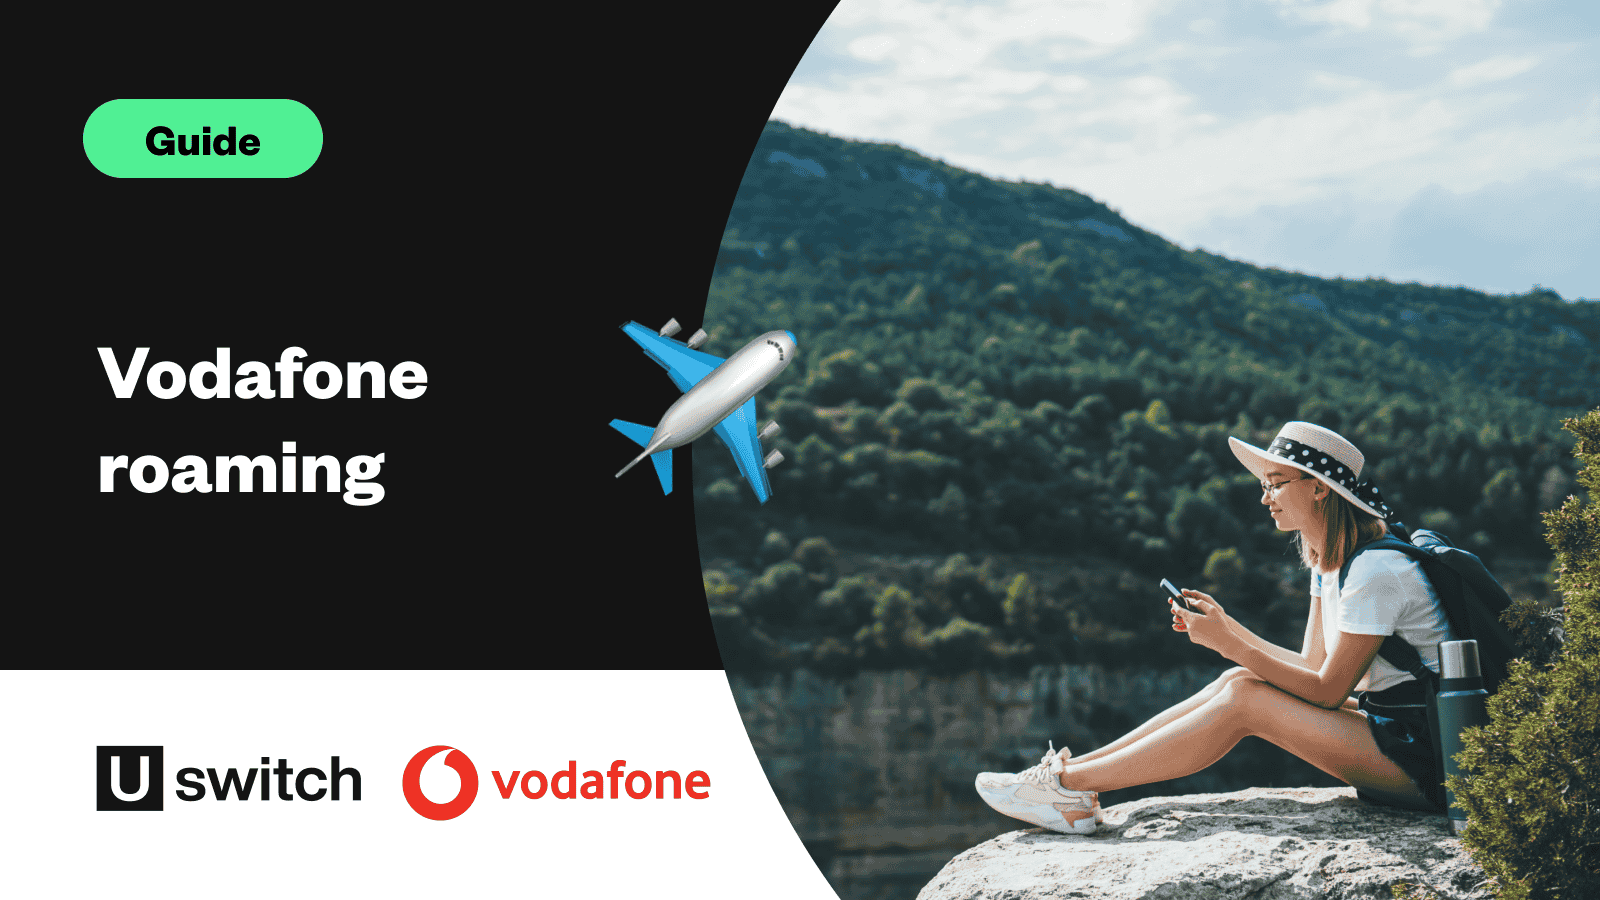 Vodafone roaming charges guide - woman traveller with mobile phone